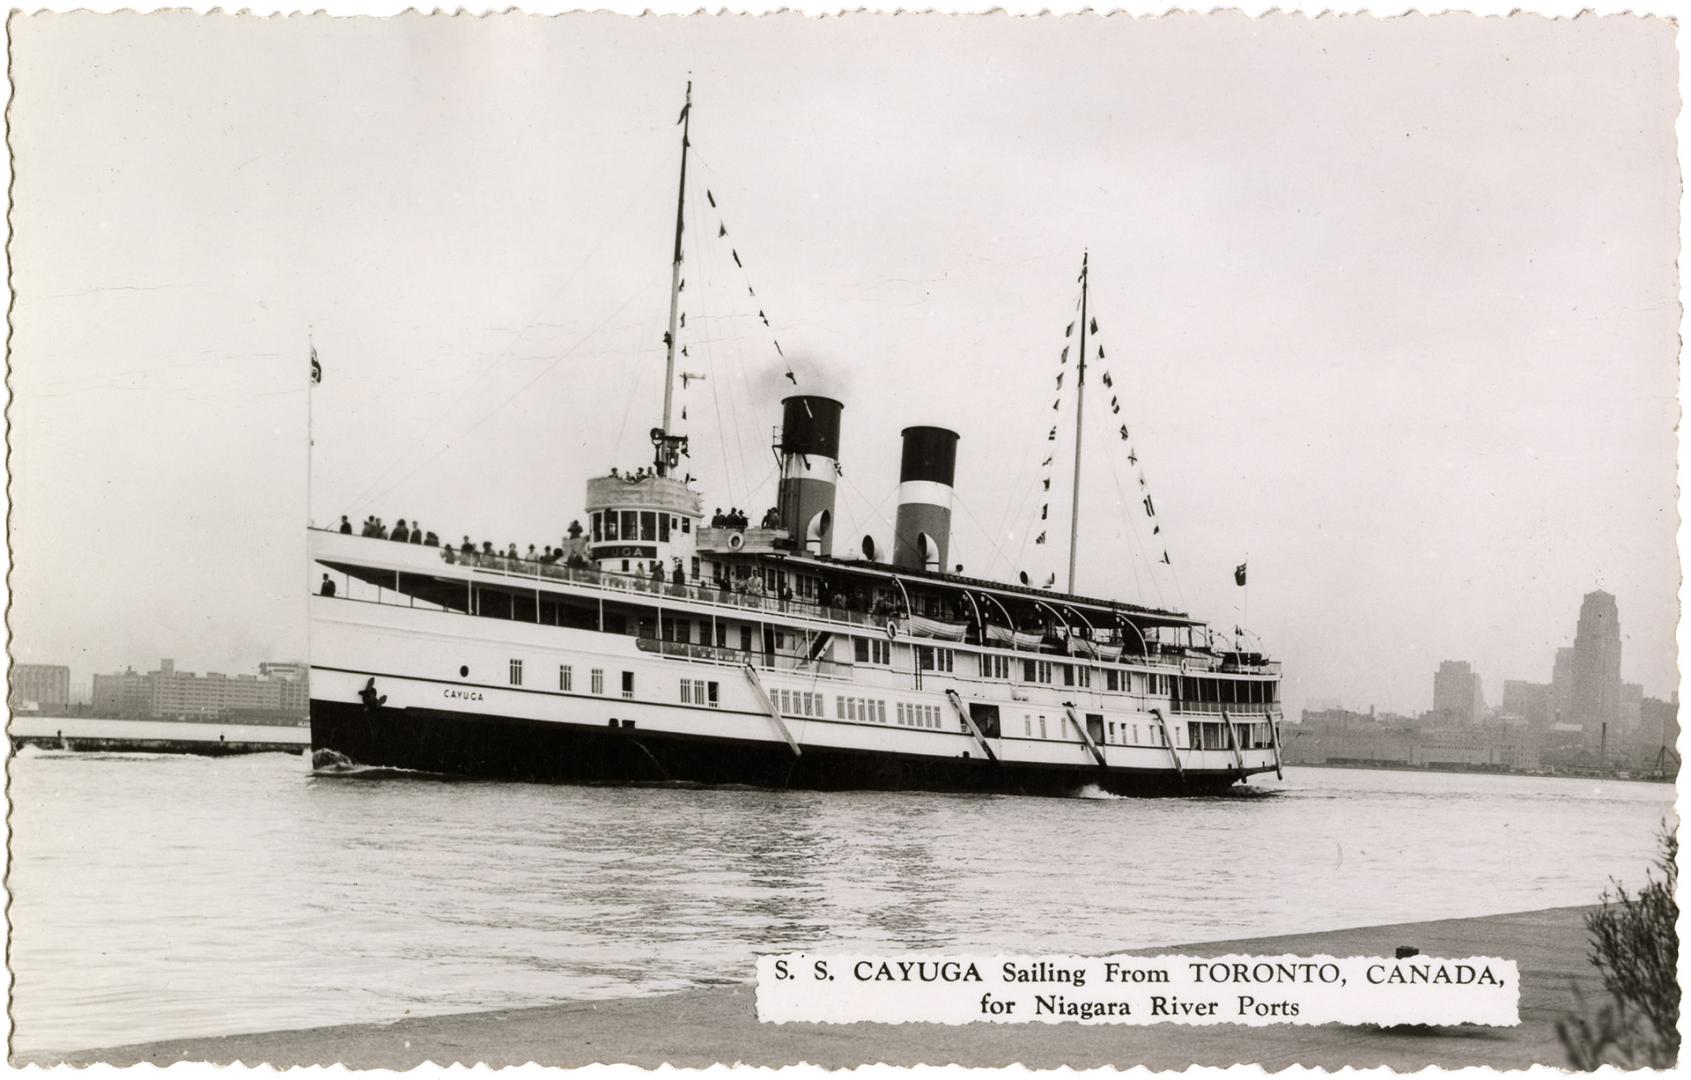 Black and white photograph of a steamship on a narrow body of water.